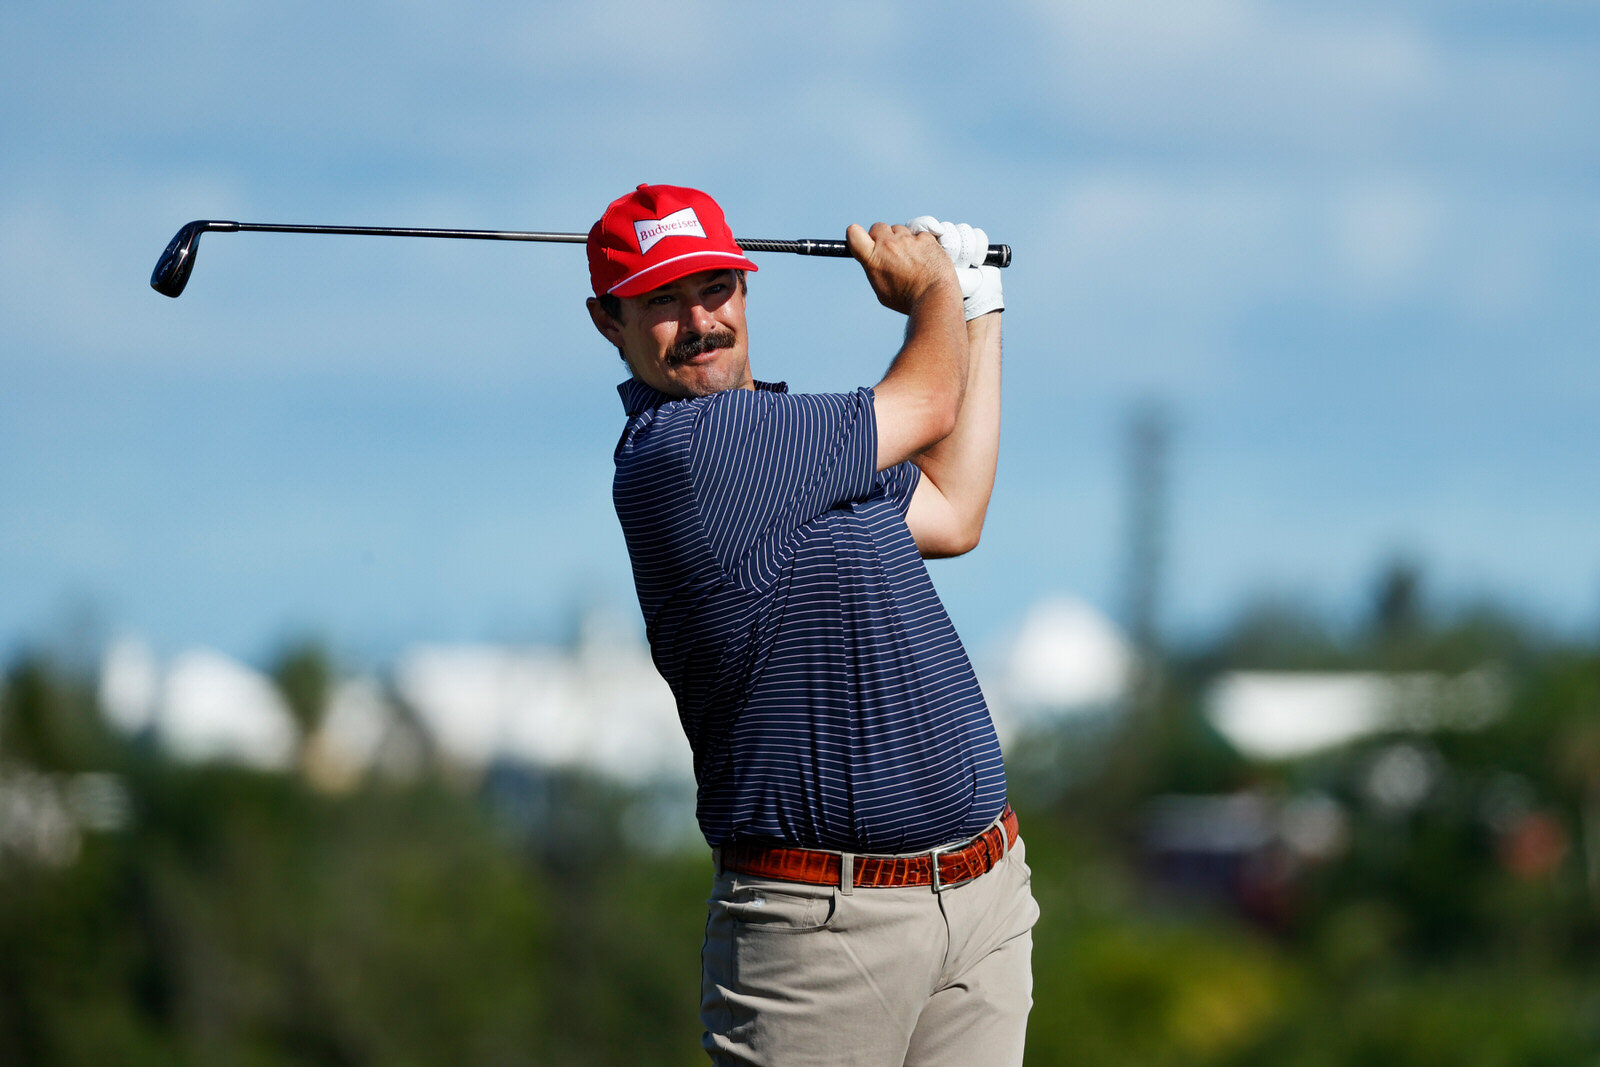  SOUTHAMPTON, BERMUDA - OCTOBER 29: Johnson Wagner of the United States plays his shot from the tenth tee during the first round of the Bermuda Championship at Port Royal Golf Course on October 29, 2020 in Southampton, Bermuda. (Photo by Gregory Sham